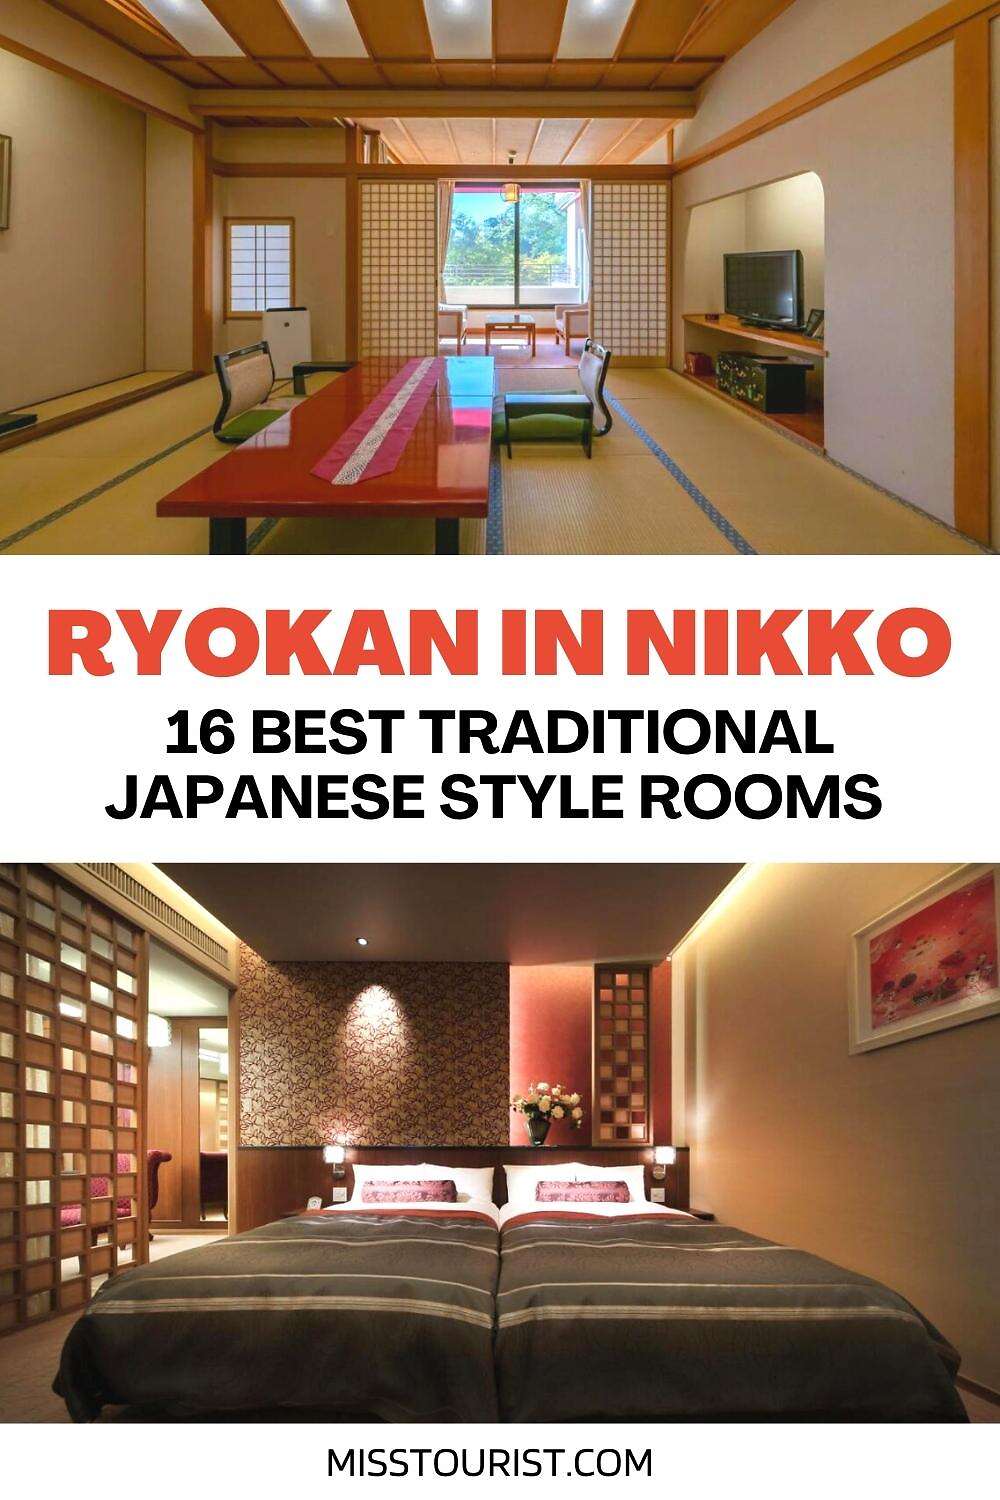 collage of 2 images of: bedroom and a ryokan